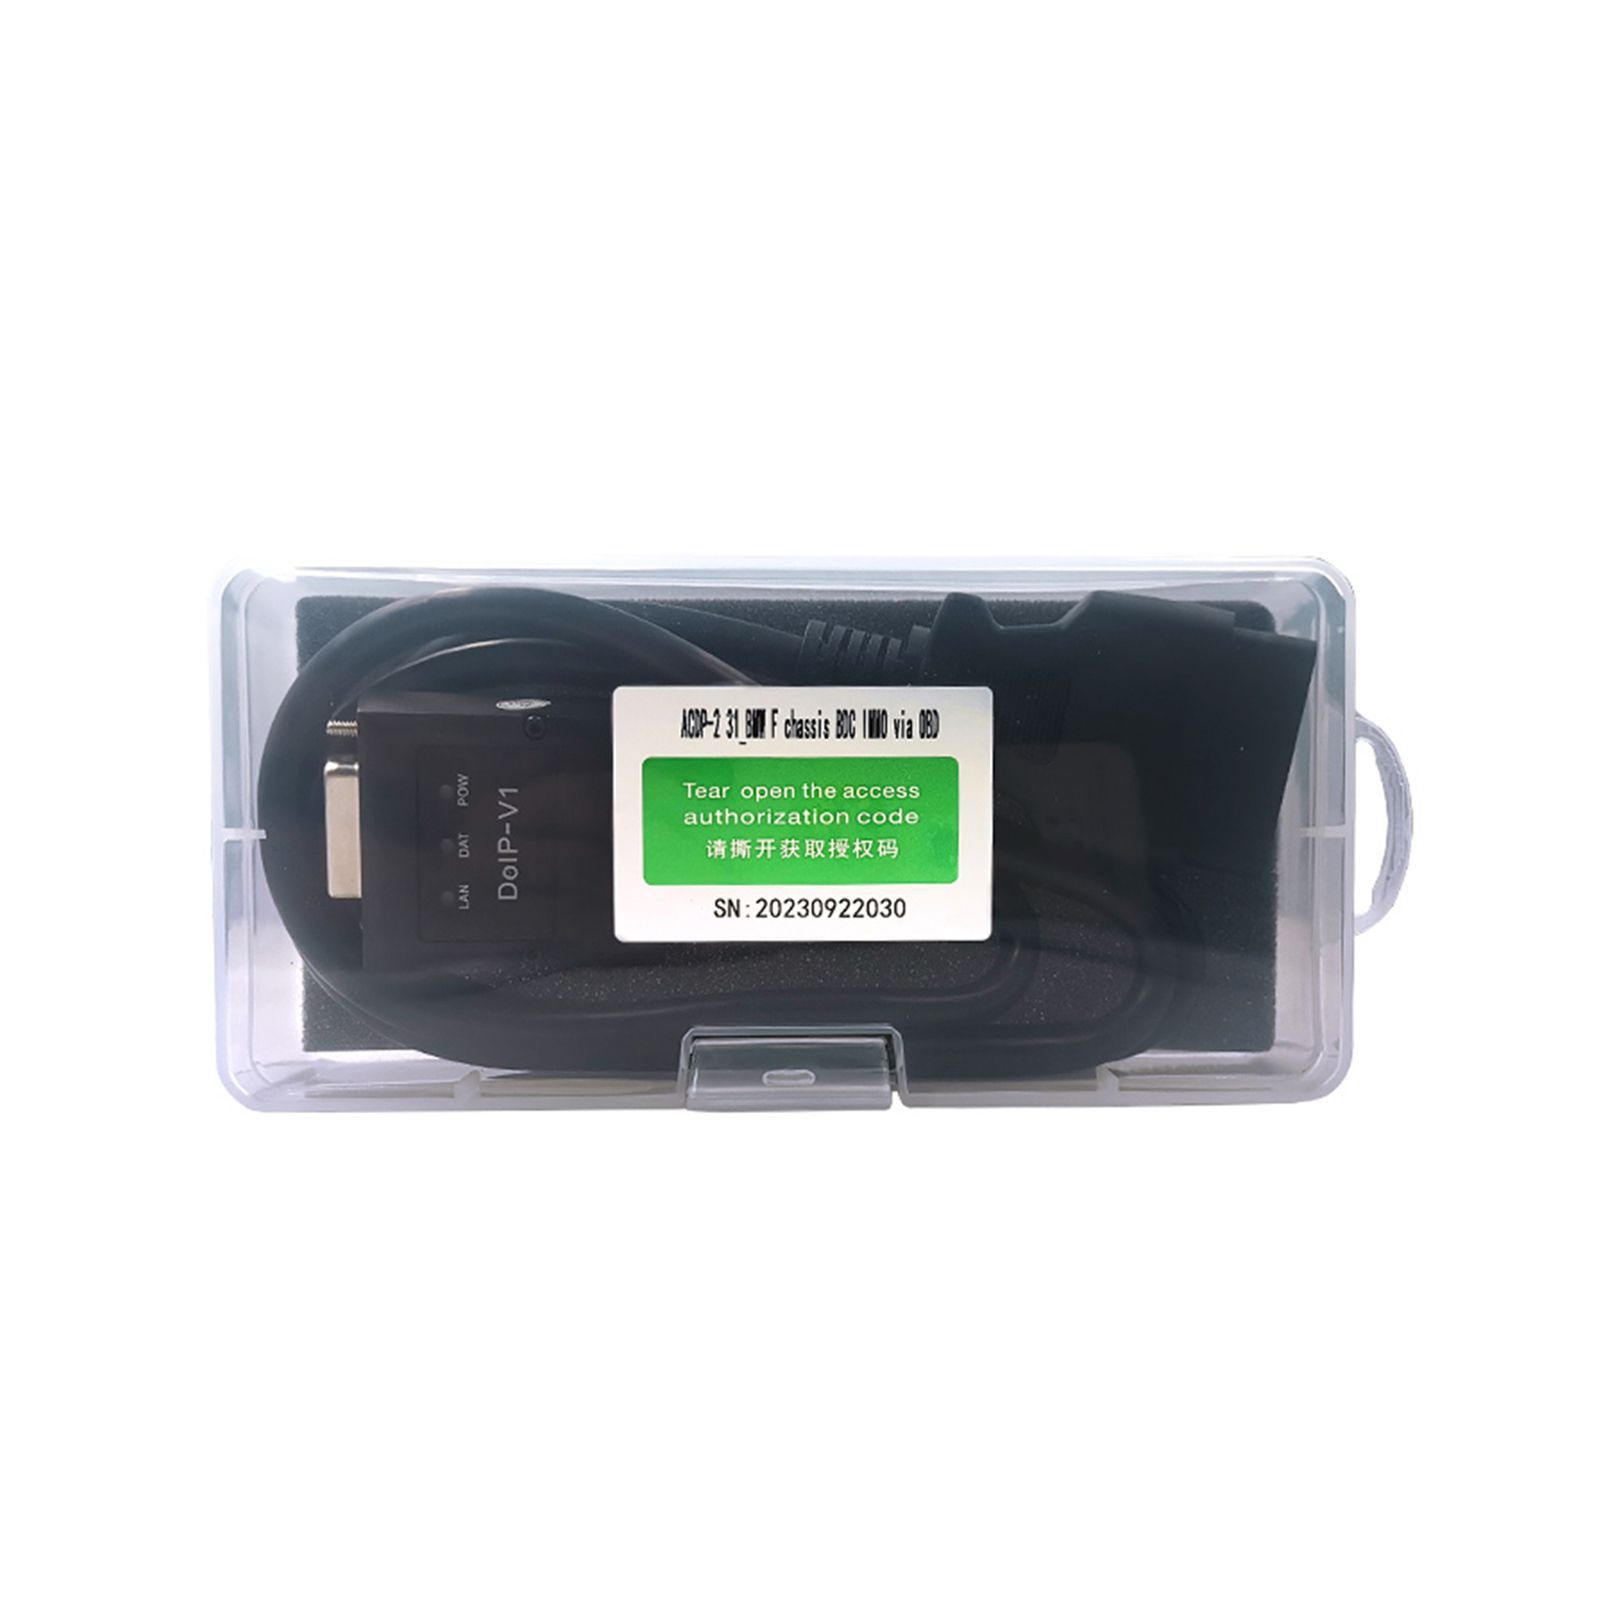 2023 Yanhua ACDP ACDP-2 Module31 for BMW F chasis BDC Key Programming and Mileage Reset Via OBD with License A501